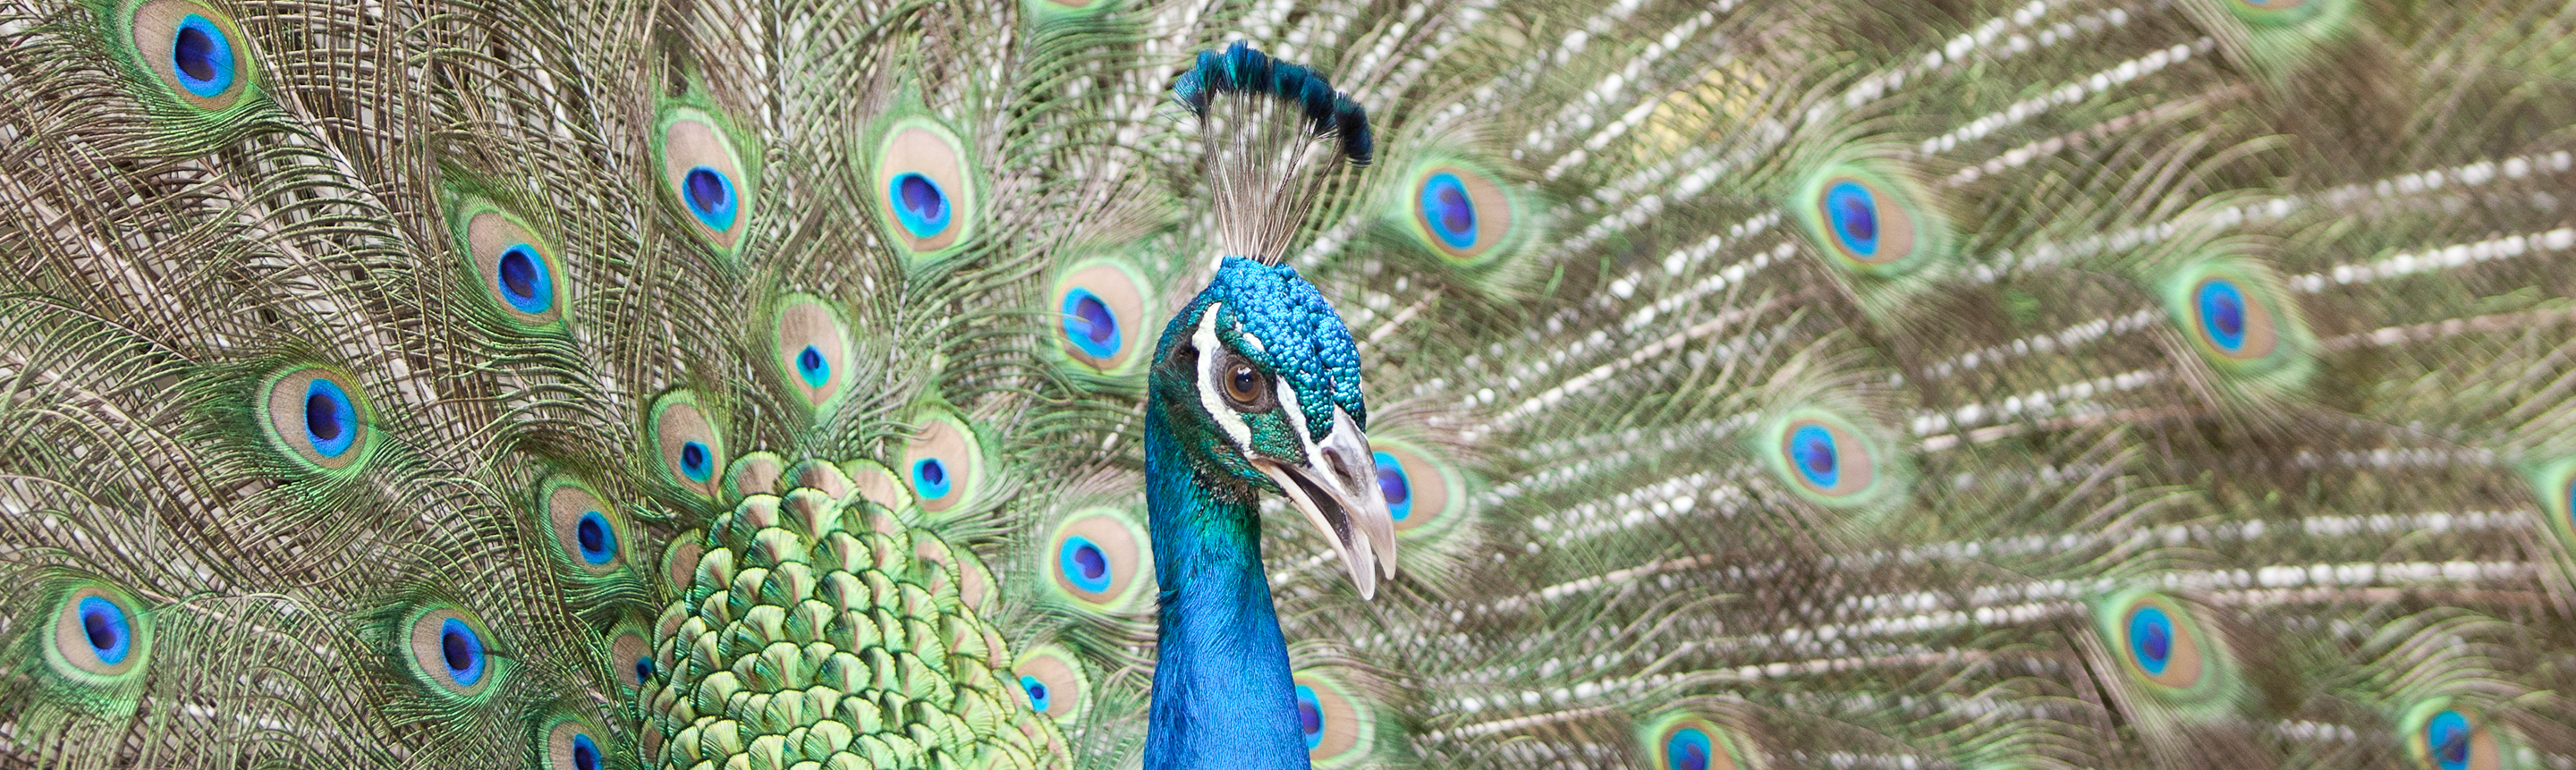 Indian Peafowl Facts | India's Wildlife Guide